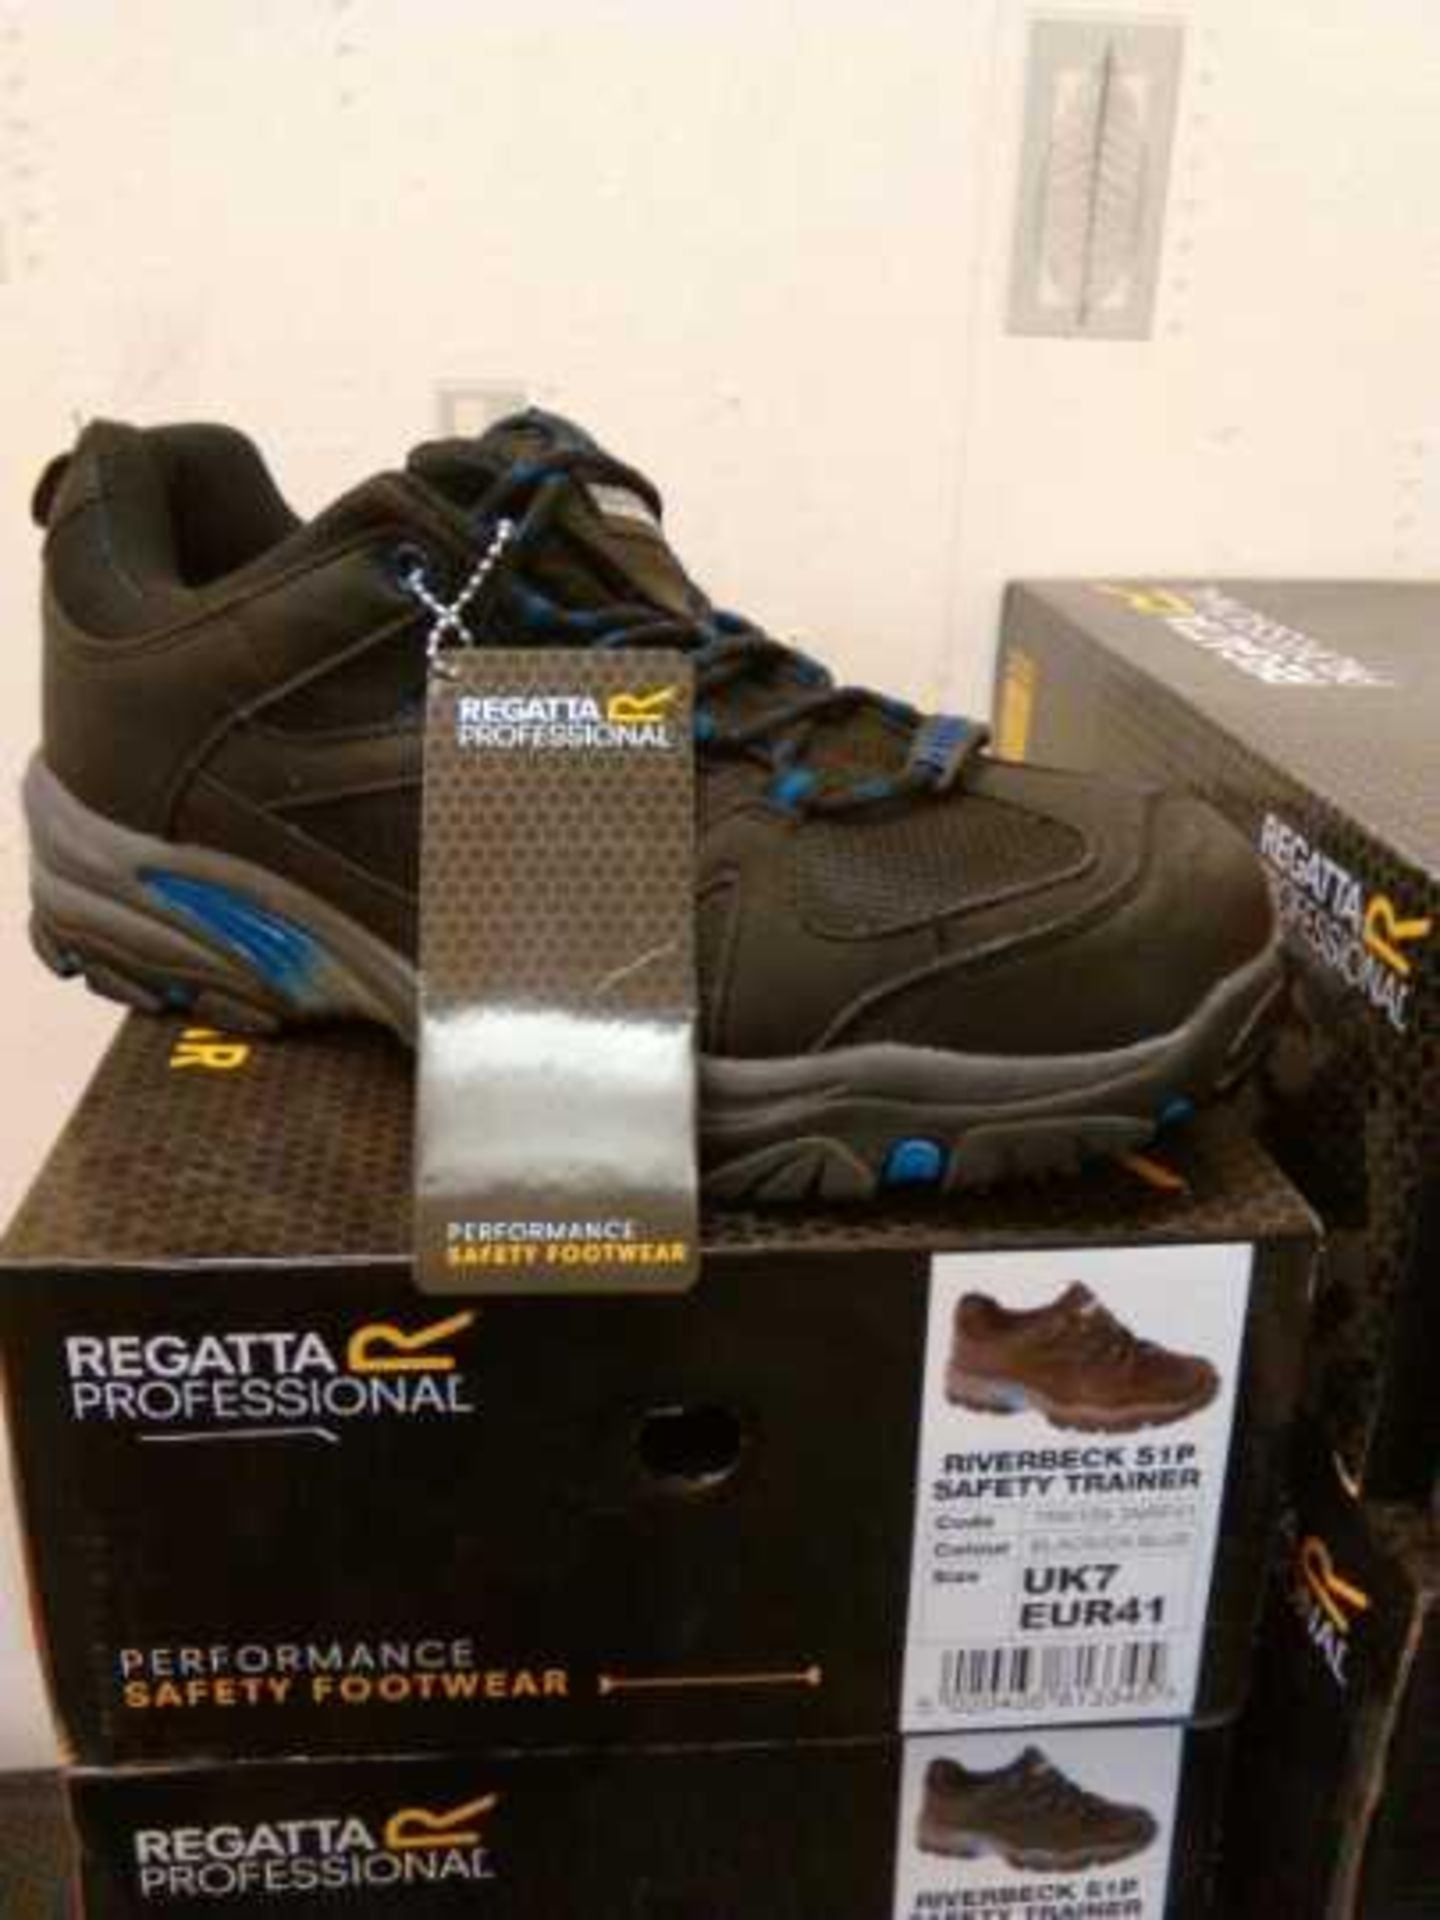 REGATTA HARDWEAR RIVERBECK S1P SAFETY TRAINERS. SIZE 9 (eur 41). nEW AND BOXED Material: PU,